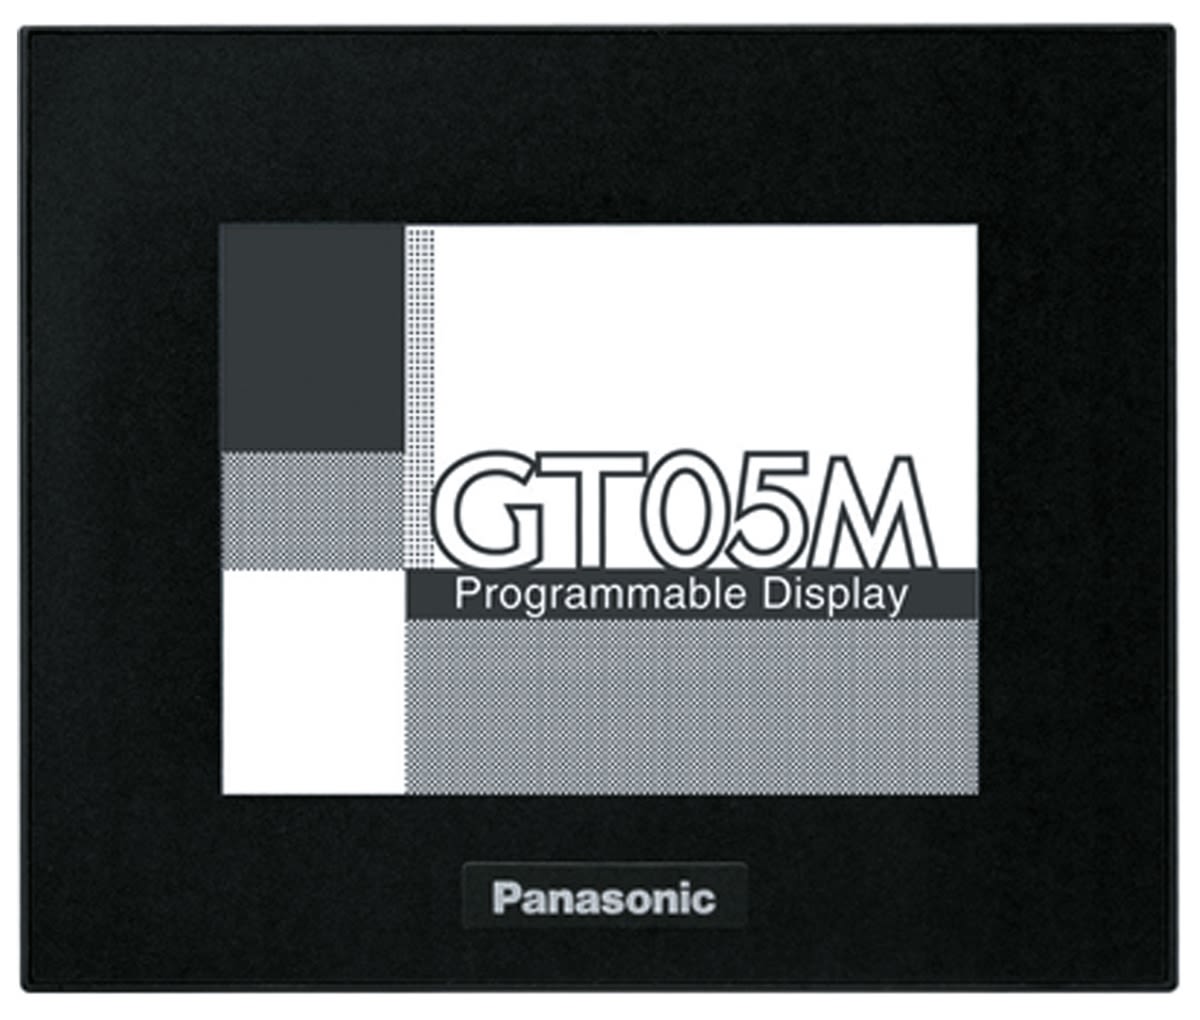 Panasonic GT Series Programmable Display Touch Screen HMI - 3.8 in, LCD Display, 320 x 240pixels